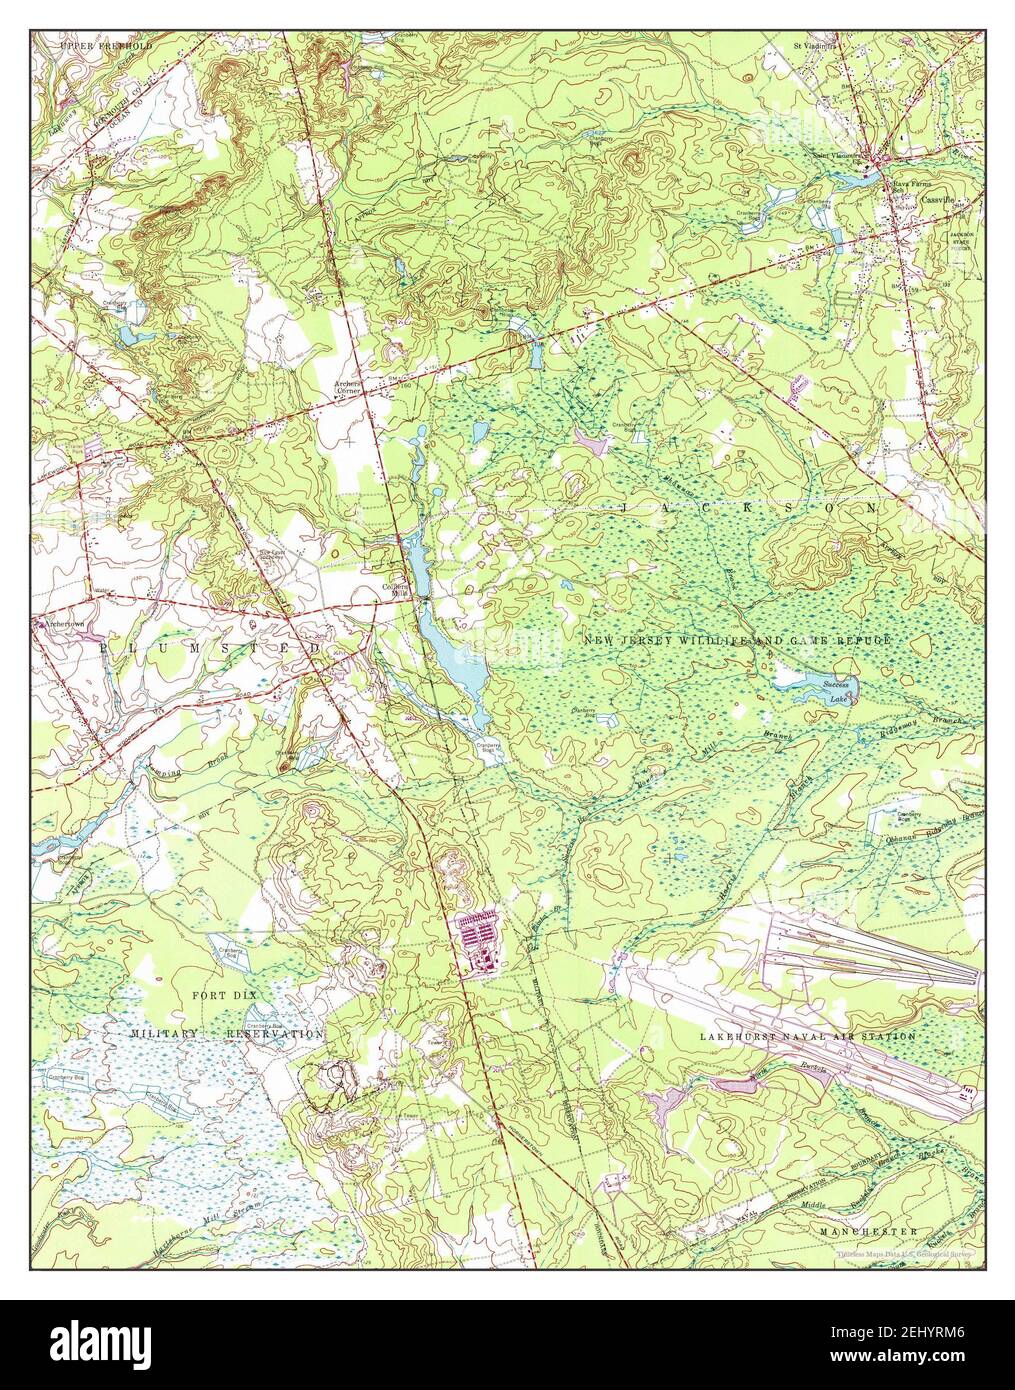 Cassville, New Jersey, map 1957, 1:24000, United States of America by Timeless Maps, data U.S. Geological Survey Stock Photo